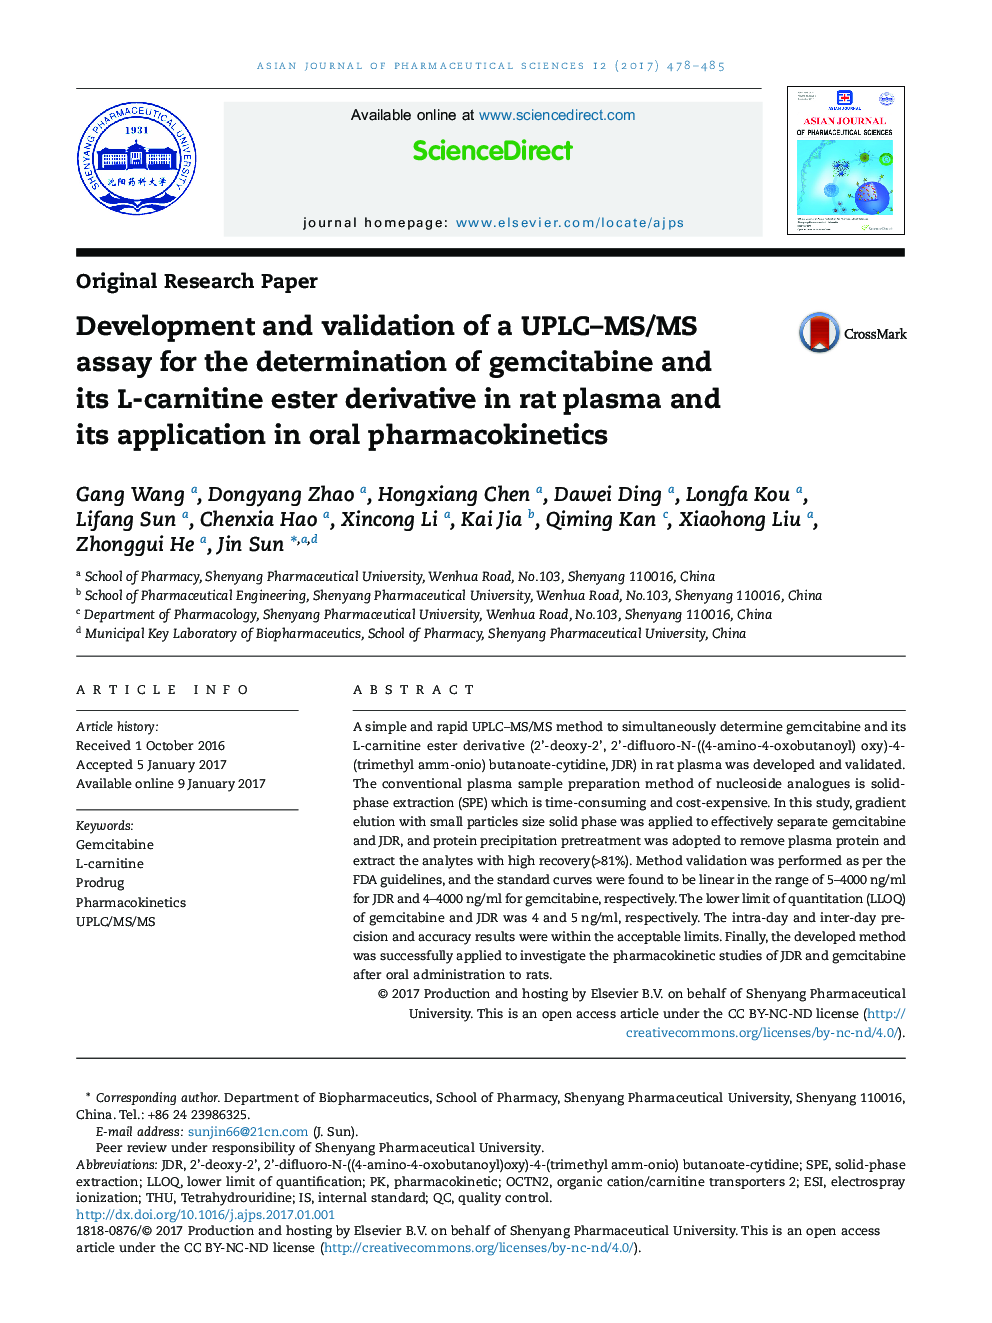 Development and validation of a UPLC-MS/MS assay for the determination of gemcitabine and its L-carnitine ester derivative in rat plasma and its application in oral pharmacokinetics